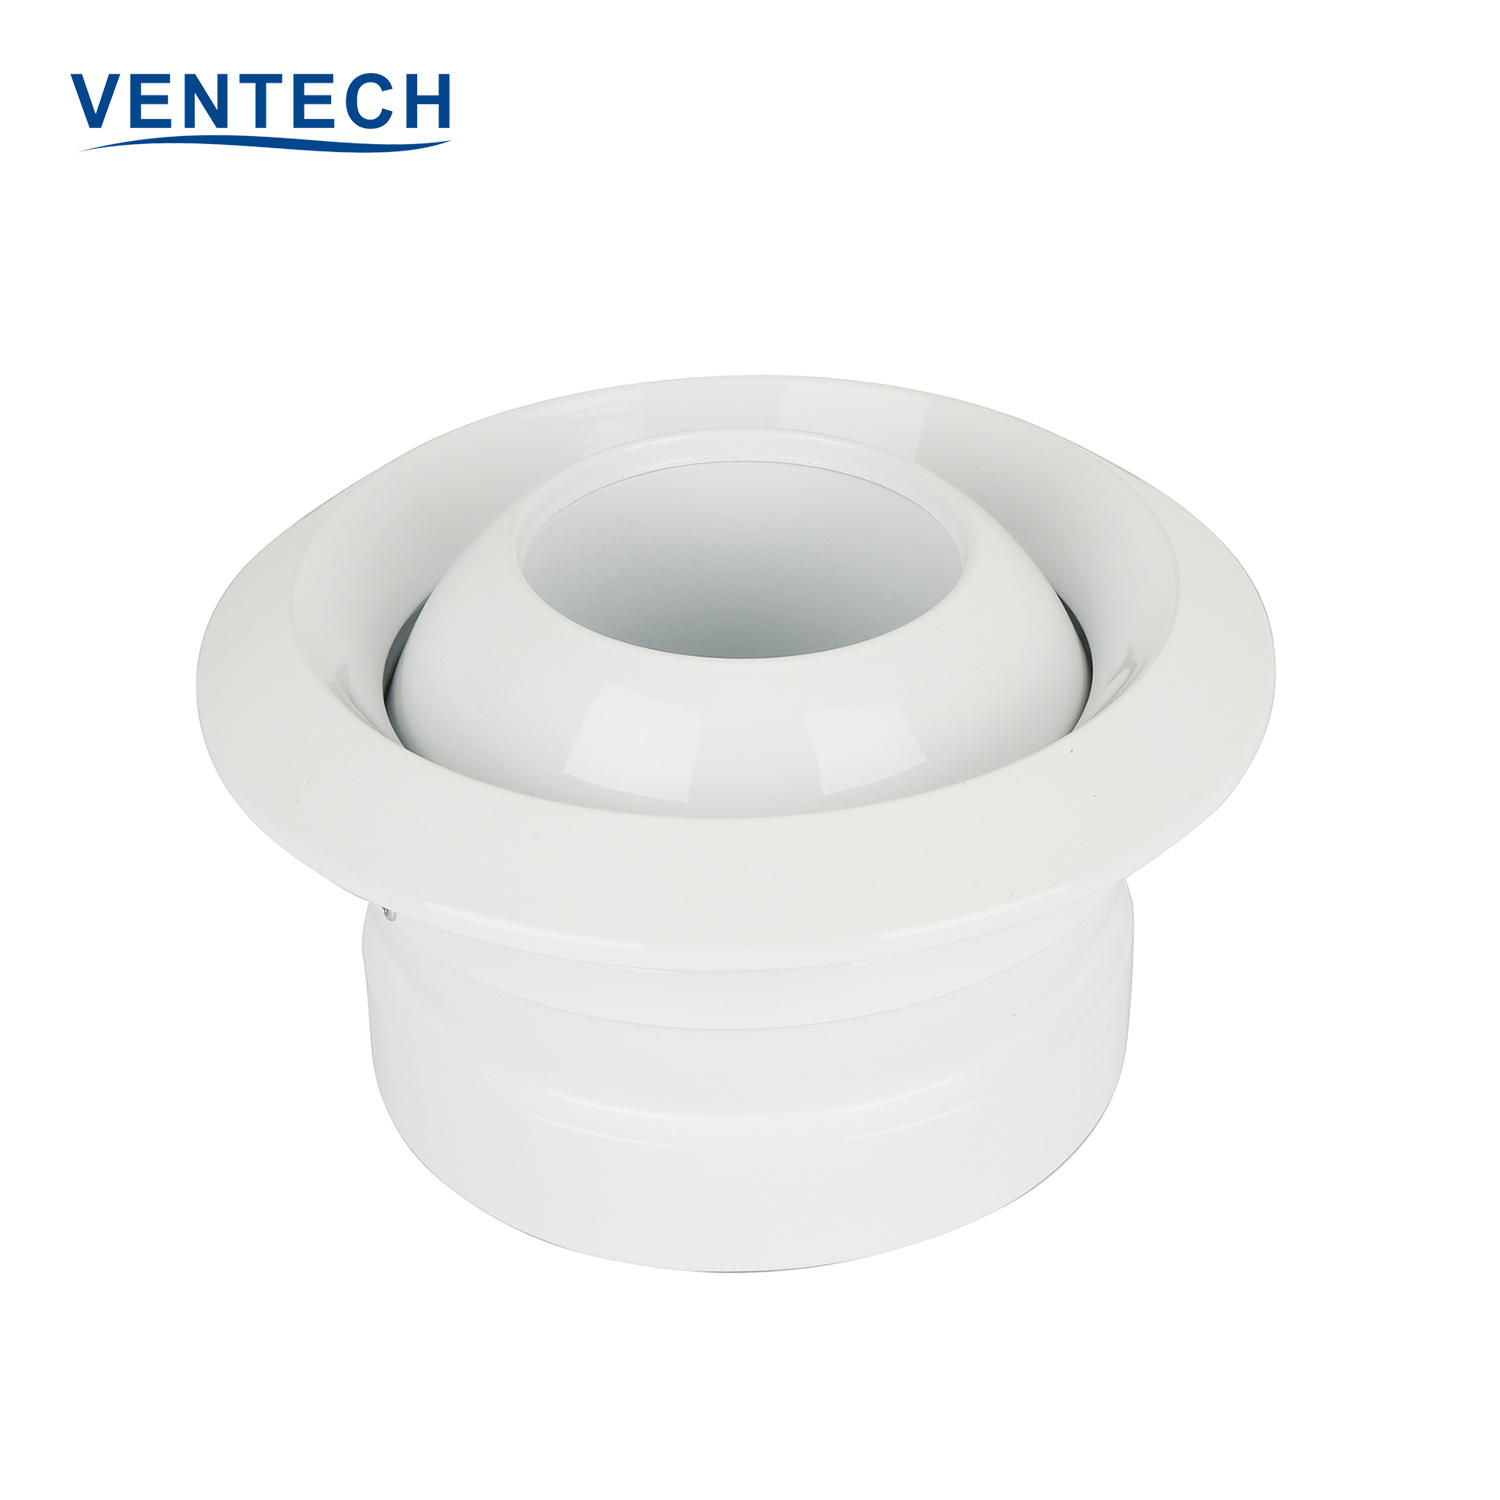 Hvac System Air Conditioning Ceiling Aluminium Supply Air Duct Round Ball Spout Jet Nozzle Air Diffusers